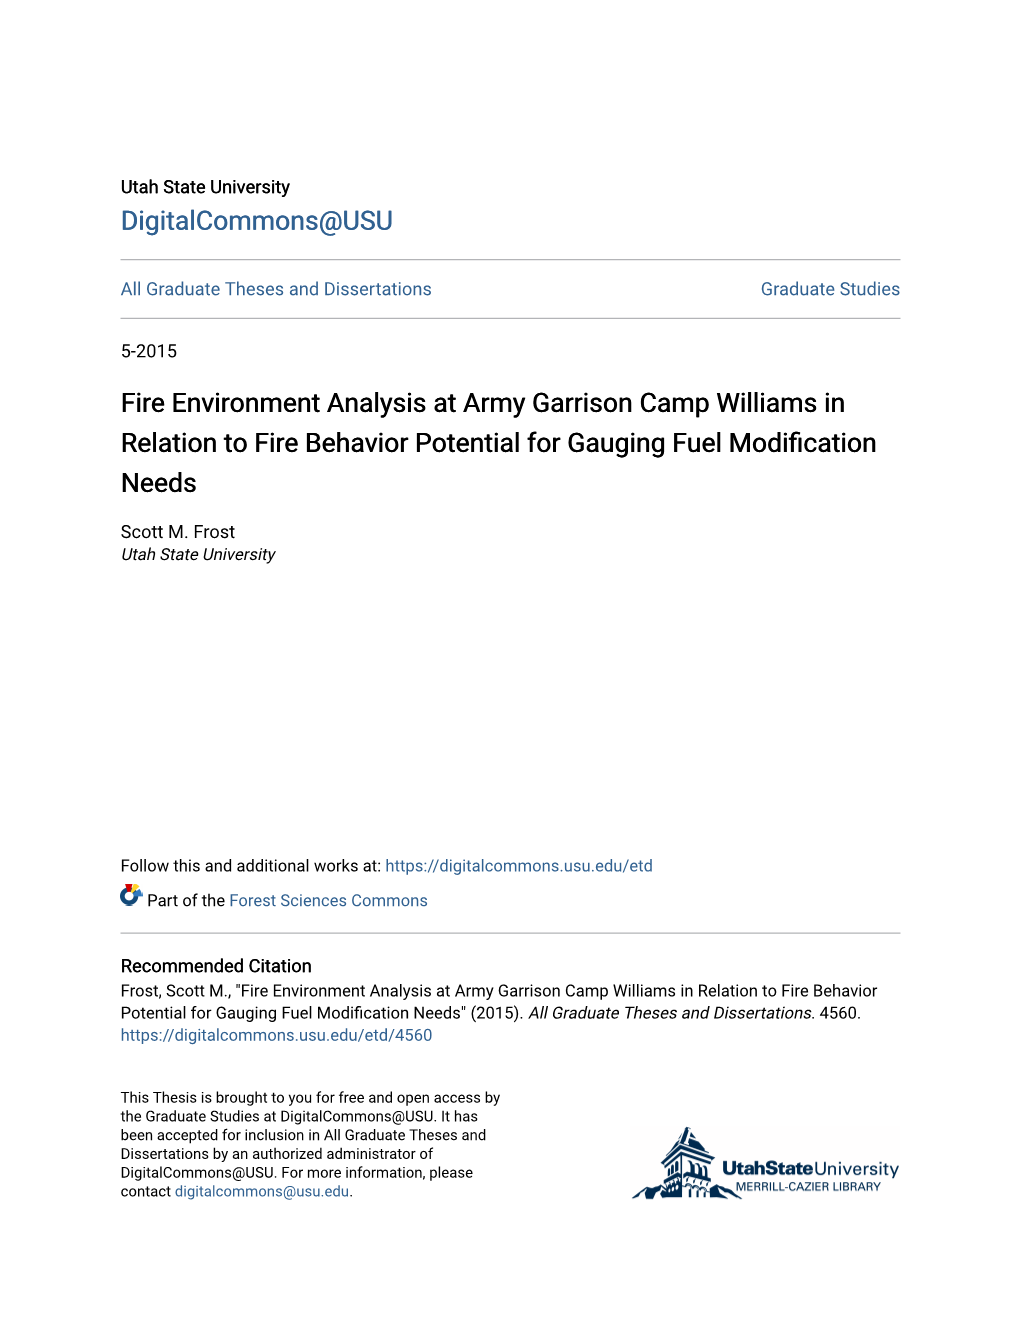 Fire Environment Analysis at Army Garrison Camp Williams in Relation to Fire Behavior Potential for Gauging Fuel Modification Needs